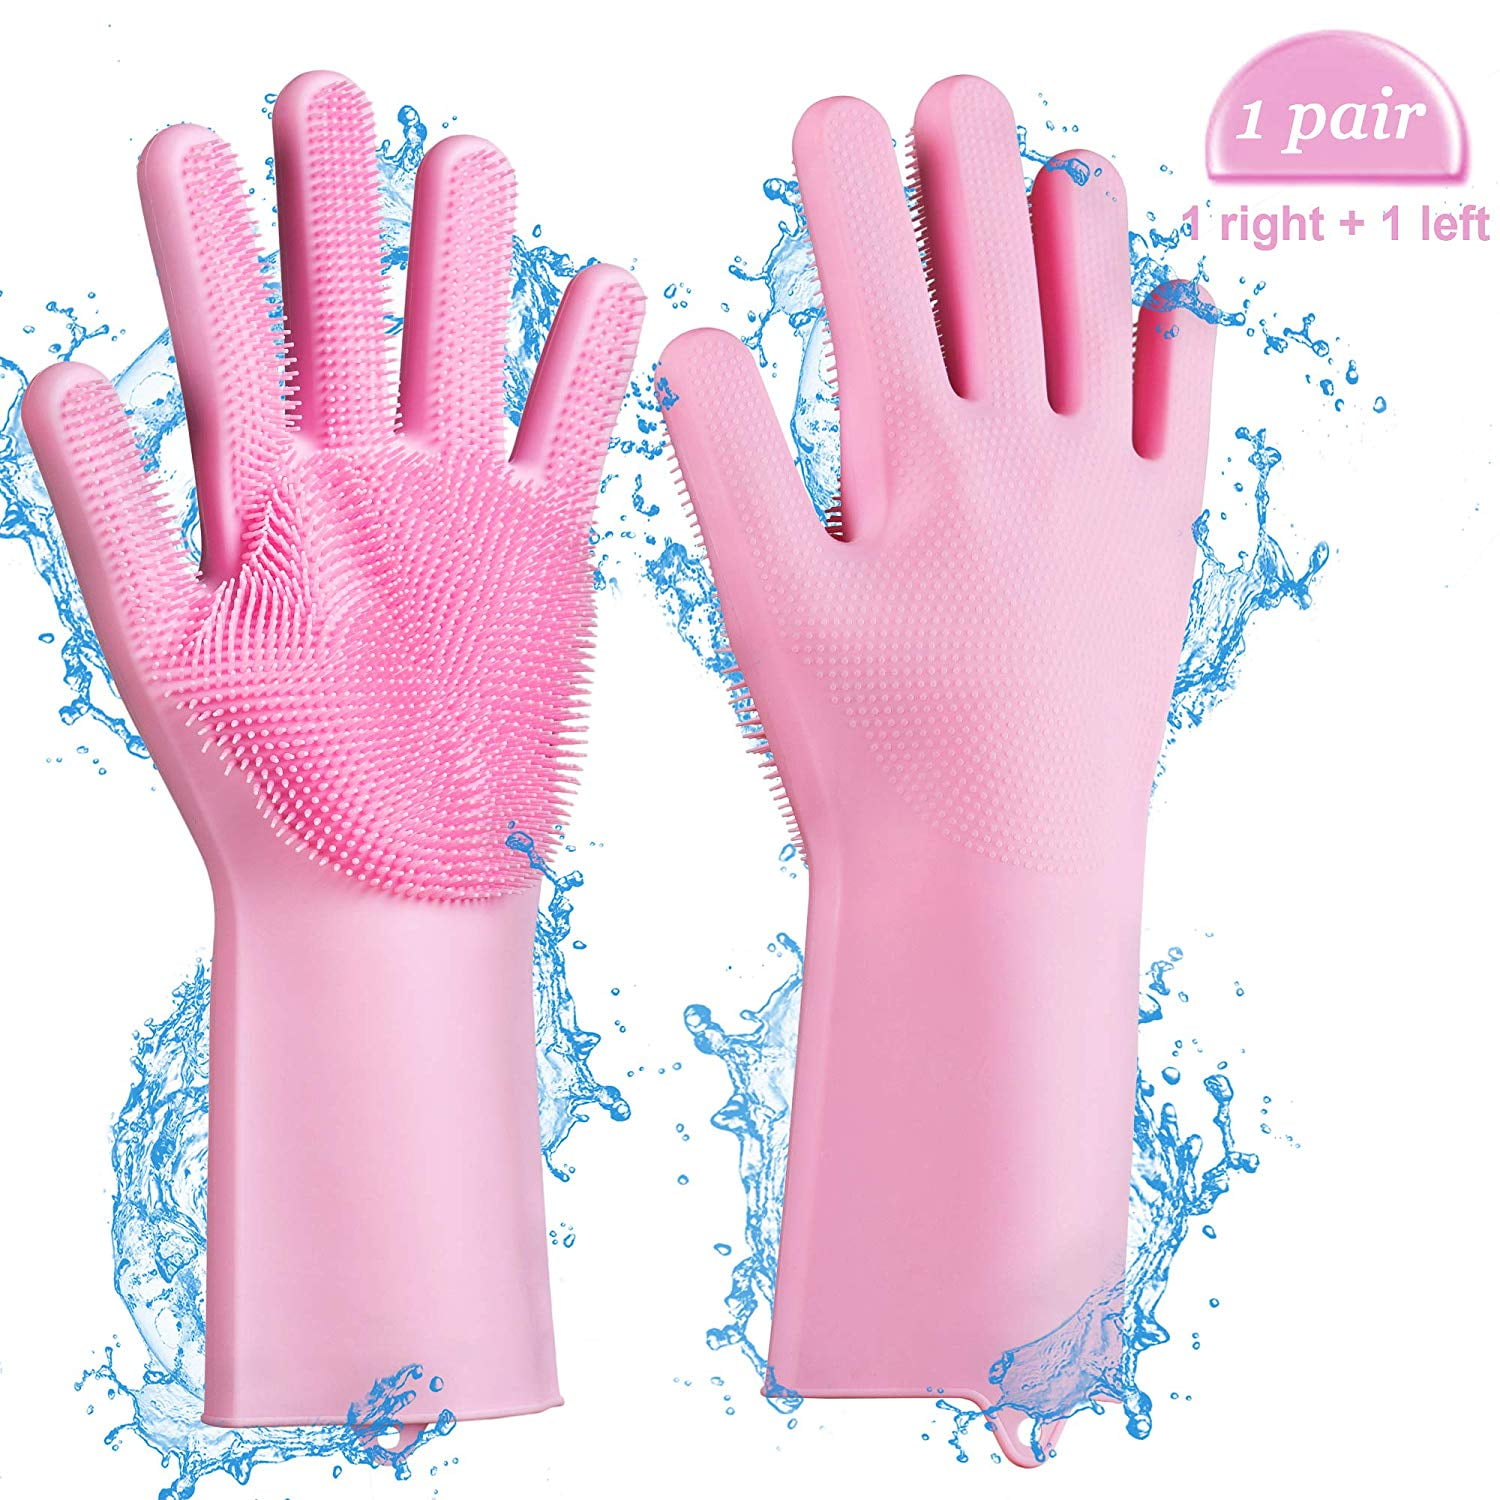 1 Pair） Deluxe Silicone Dishwashing up Gloves with Scrubber丨Reusable Household Waterproof Gloves丨Long Bristles丨Heat Resistant丨Latex Free丨Great for Kitchen,Car,Bathroom Cleaning and More（Coral 